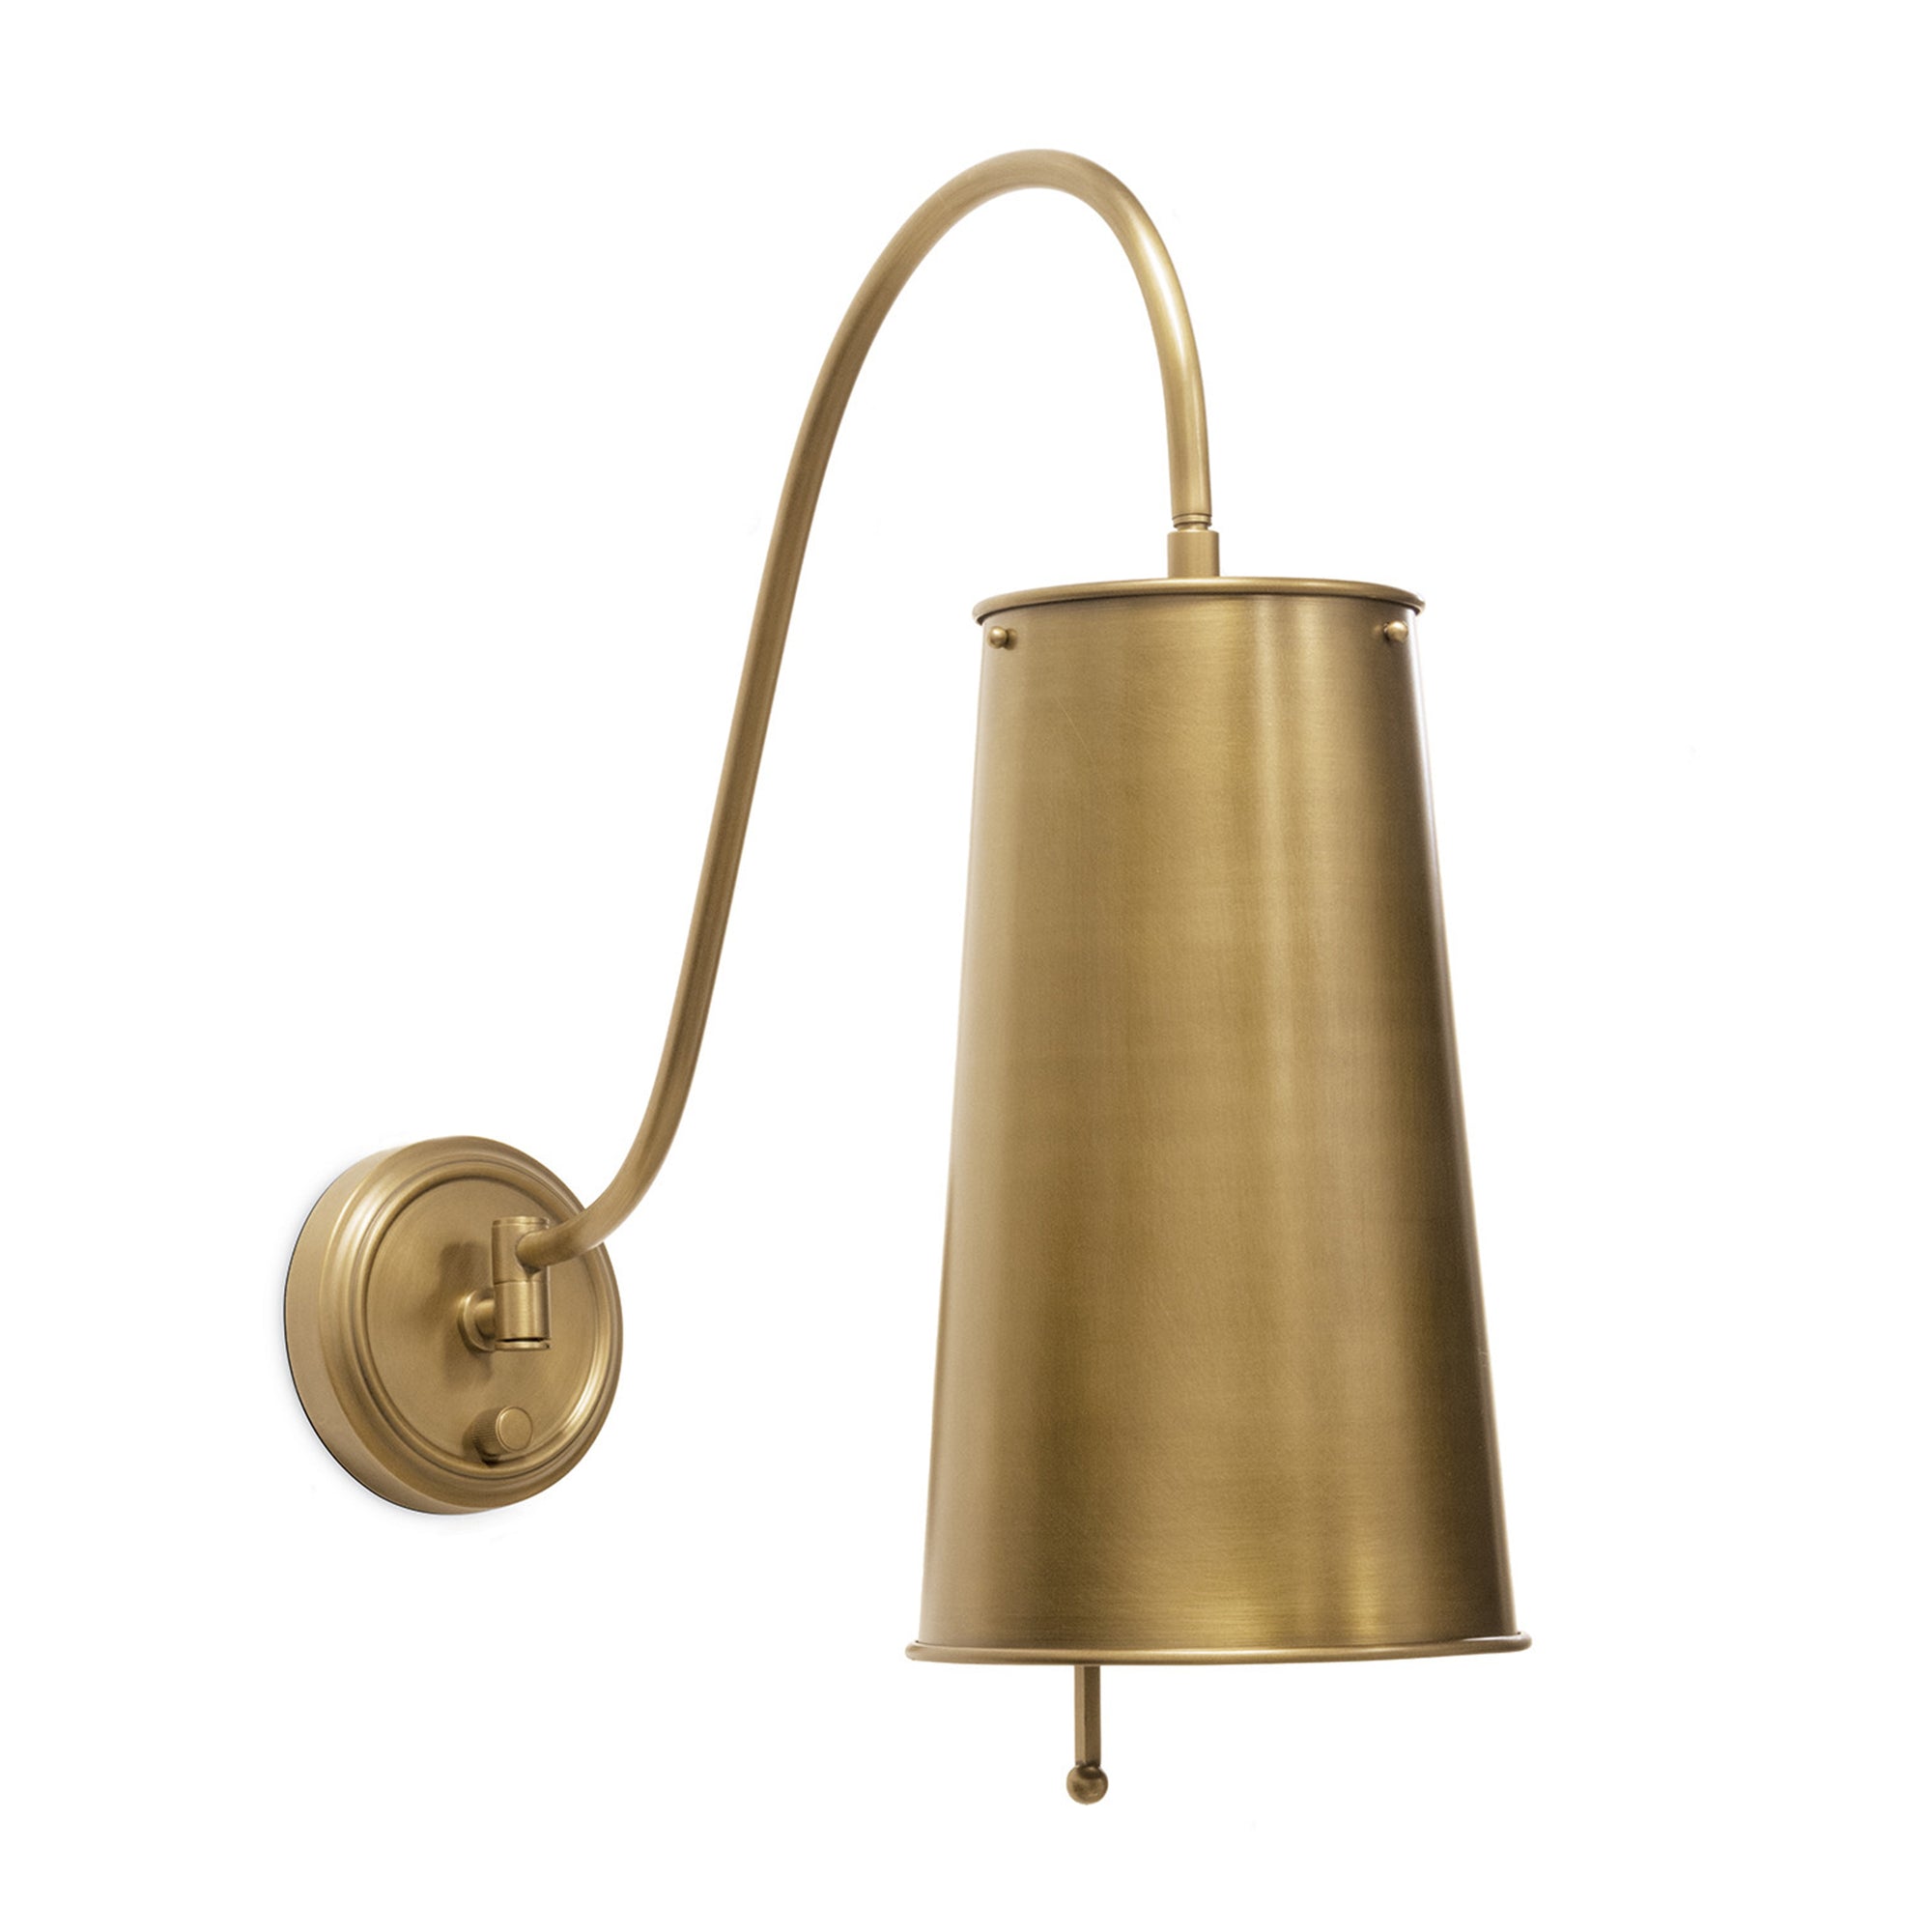 Hattie Sconce by Southern Living